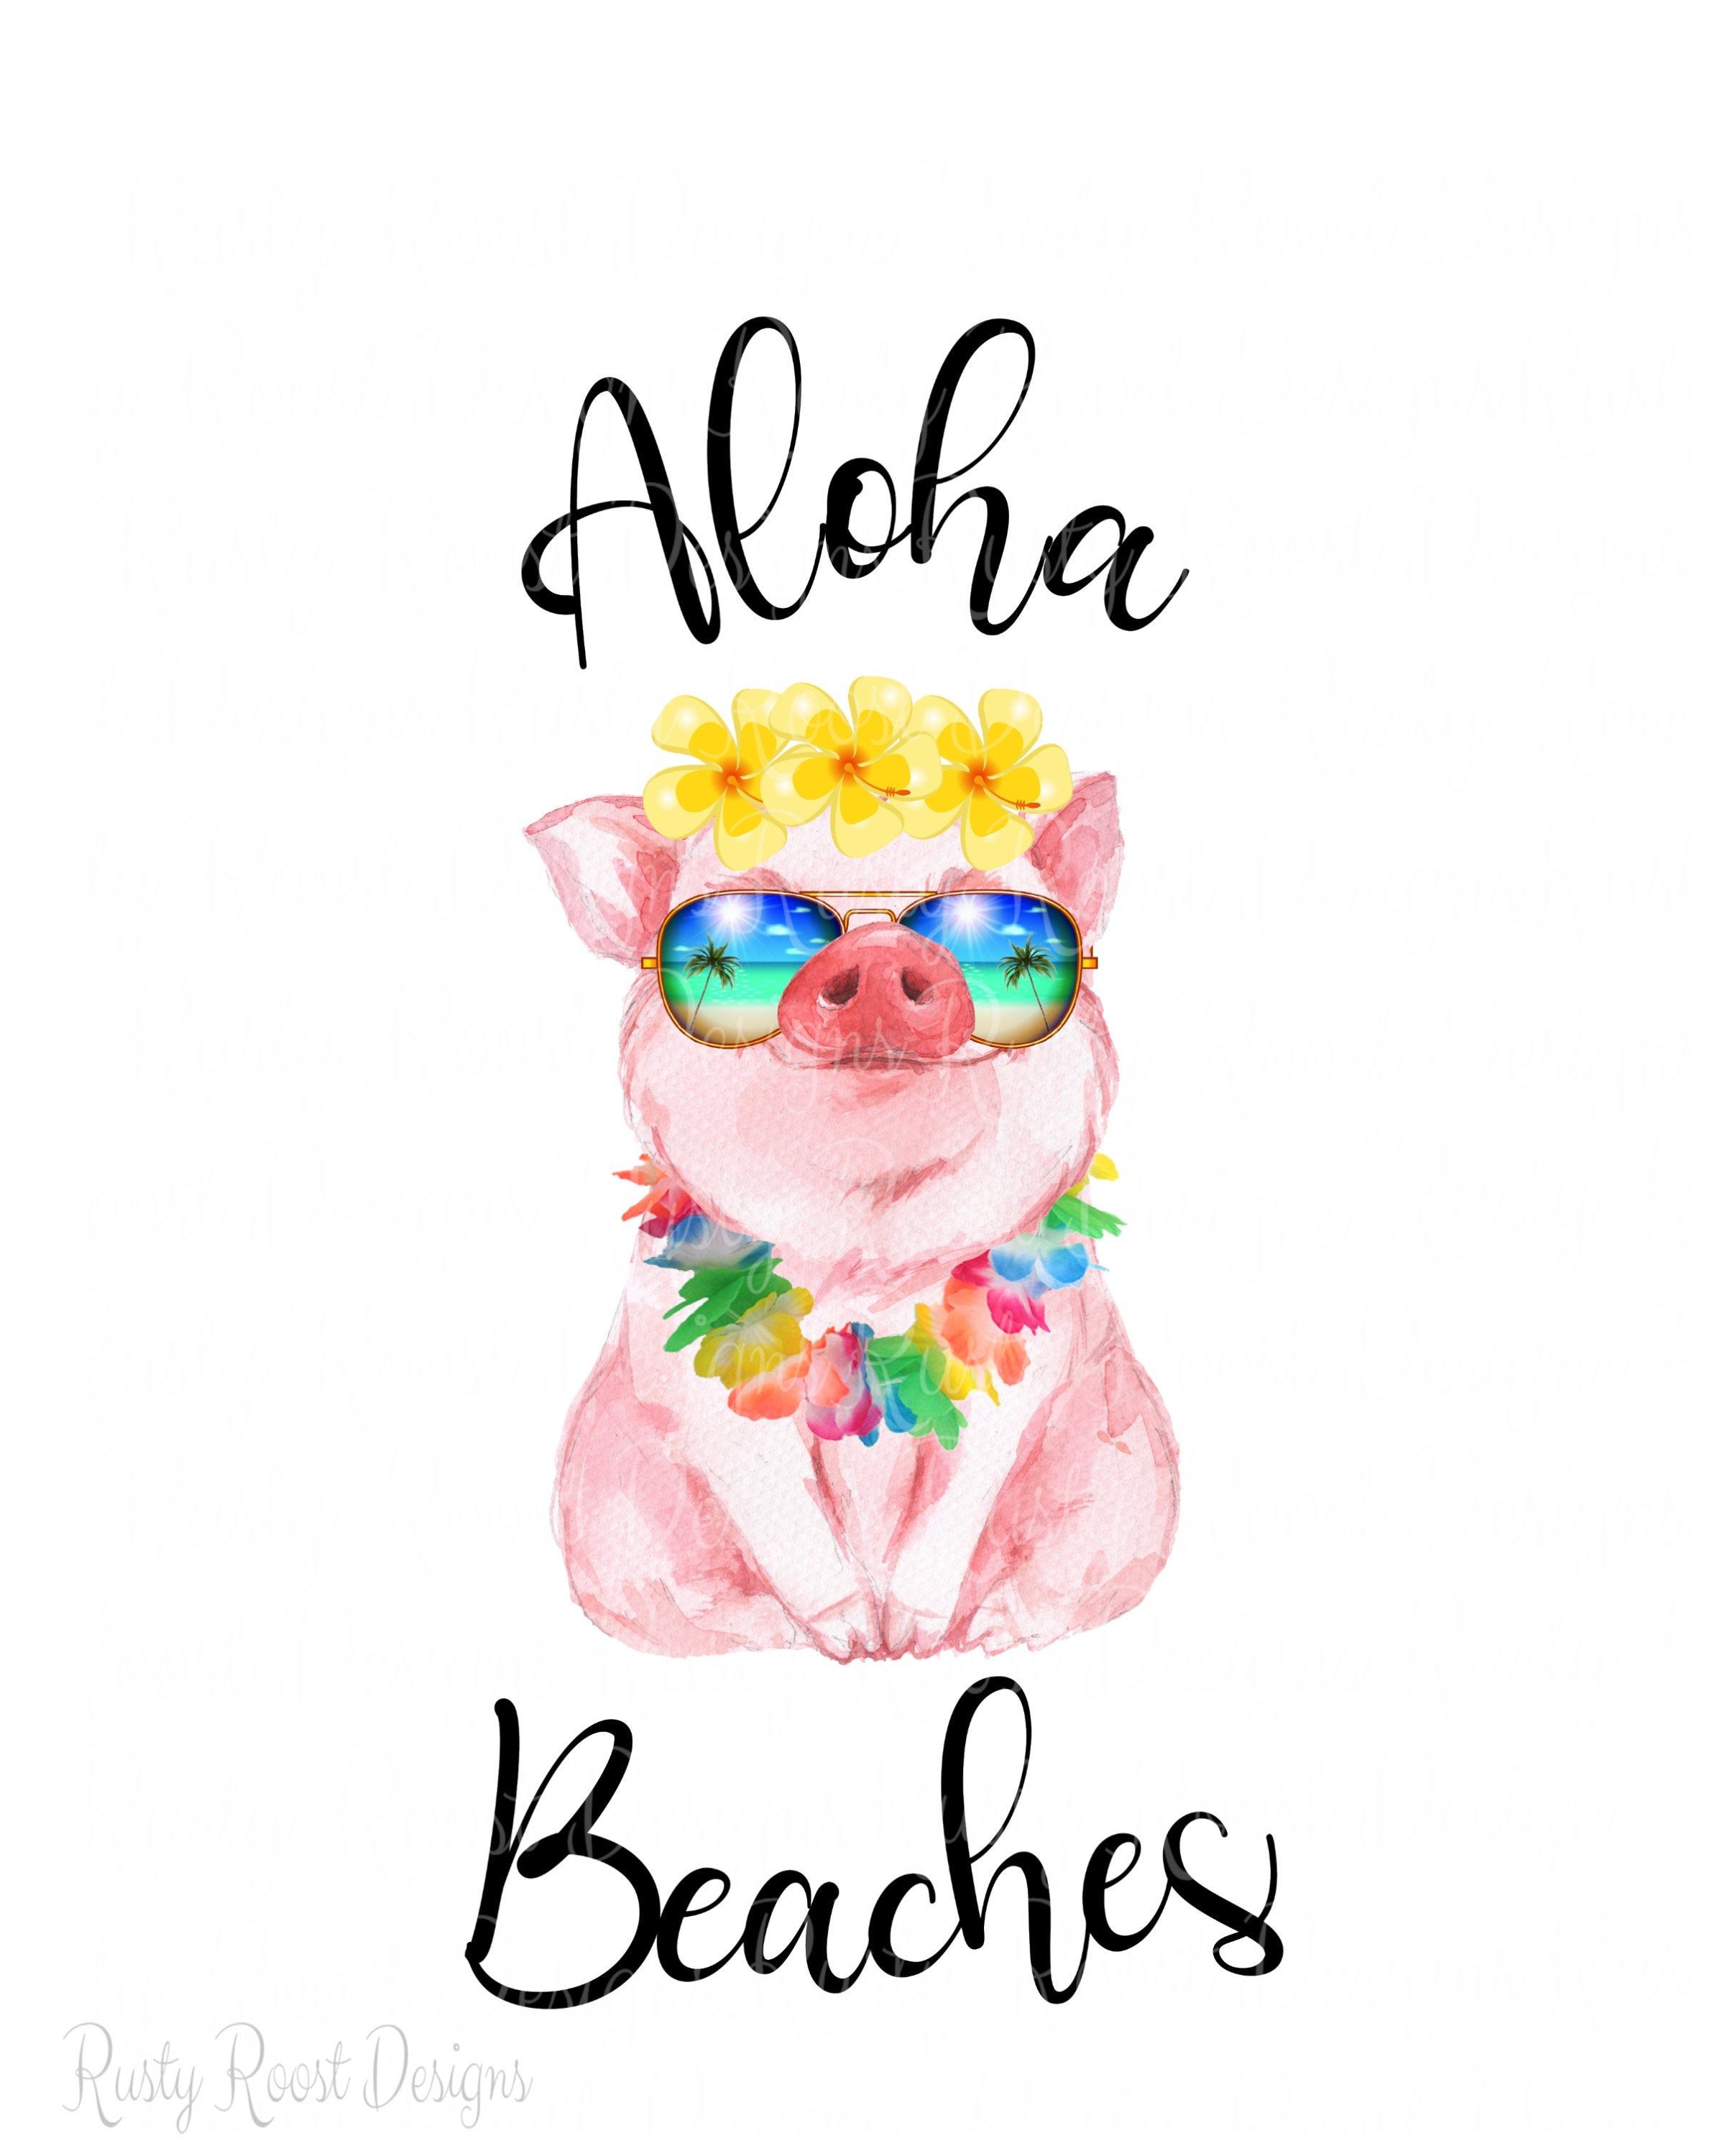 Aloha beaches png,pig with sunglasses,tropical pig png.